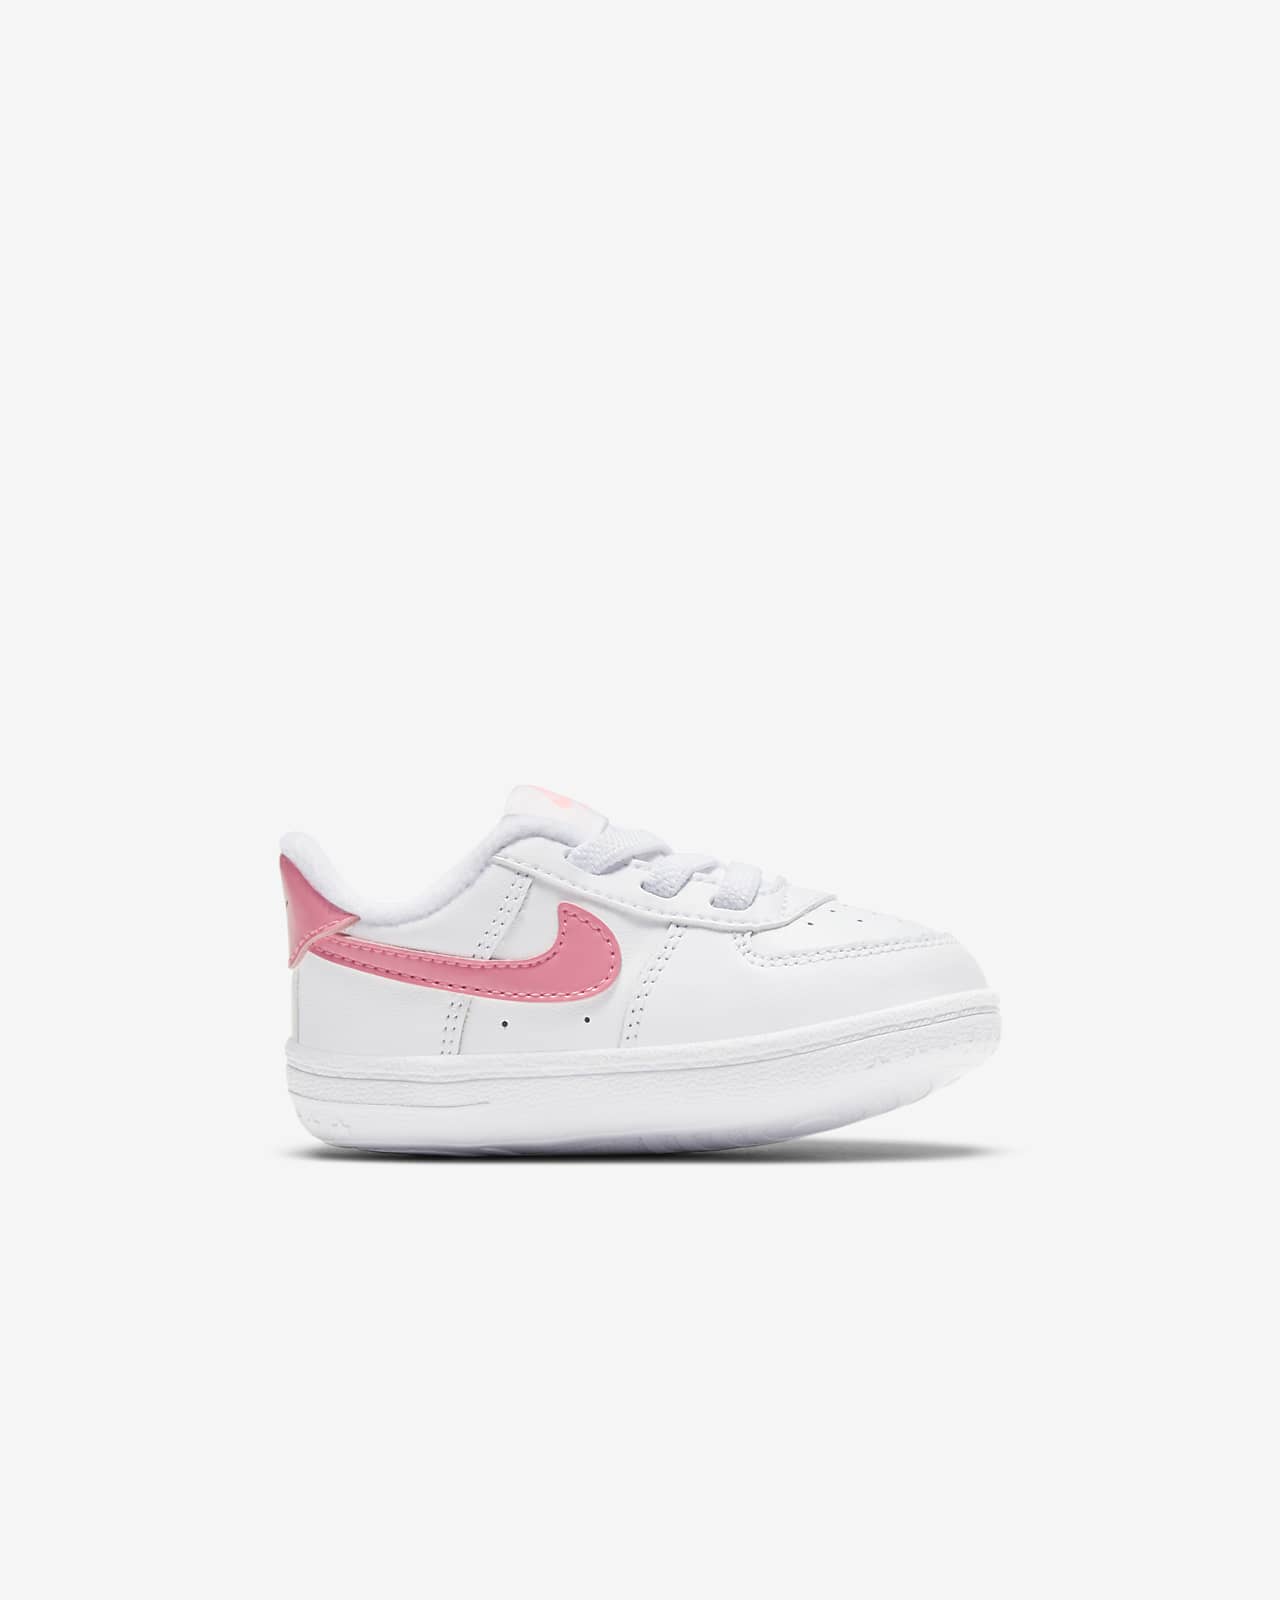 nike force 1 baby bootie